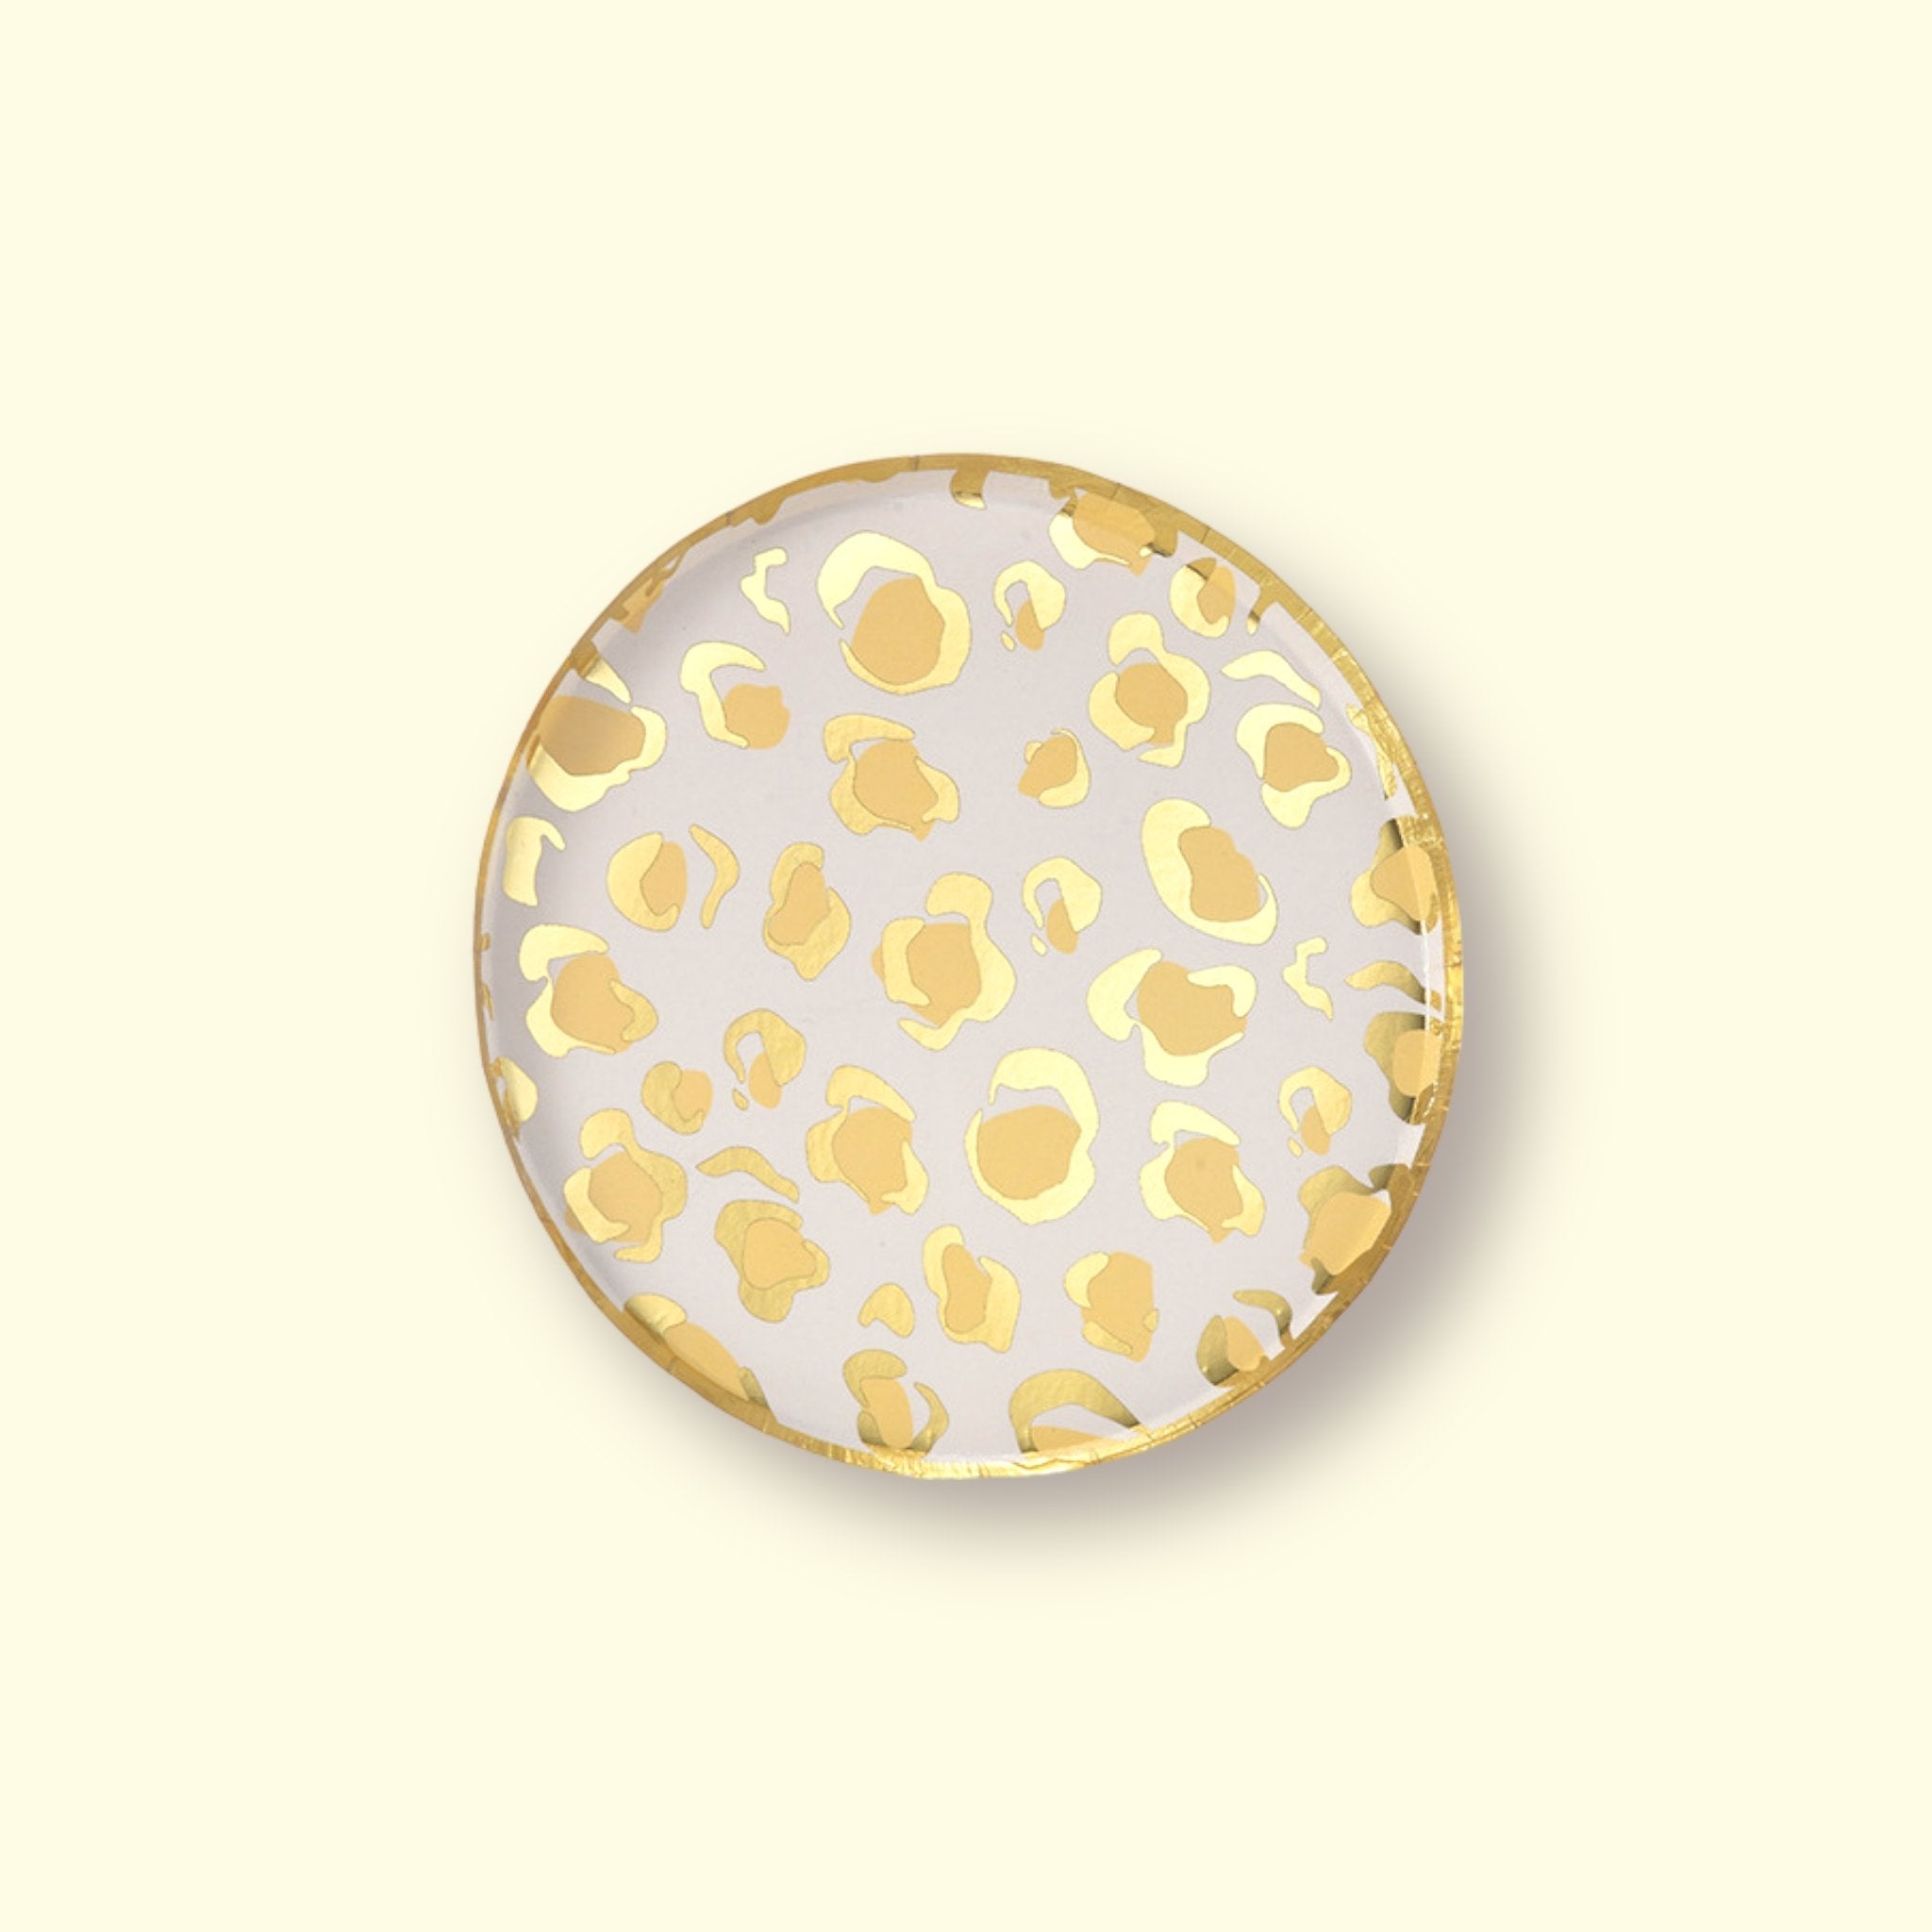 10 X Jungle Animal Gold Leopard Print Disposable Plates (18 cm) - Cook and Party